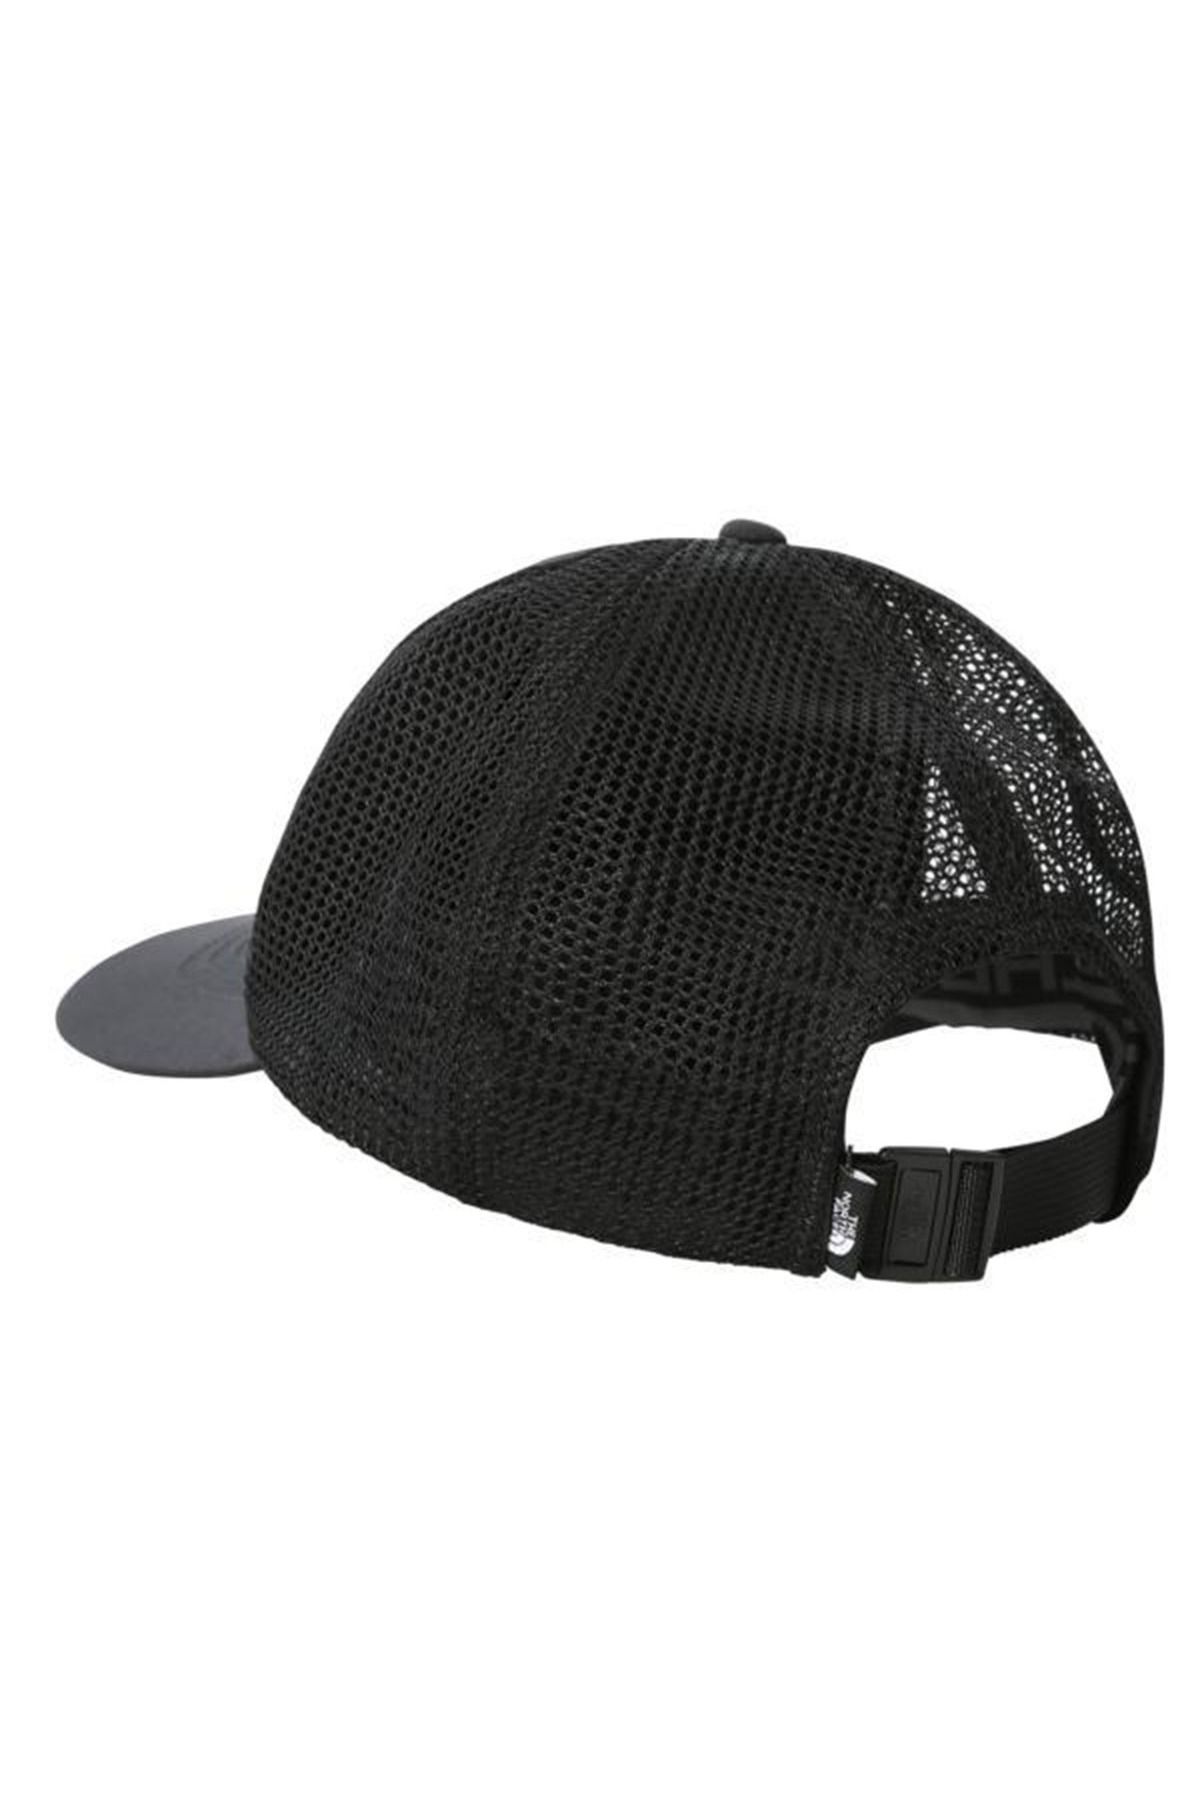 The North Face کلاه مش Horizon Unisex Black Outdoor Hat NF0A55IUJK31